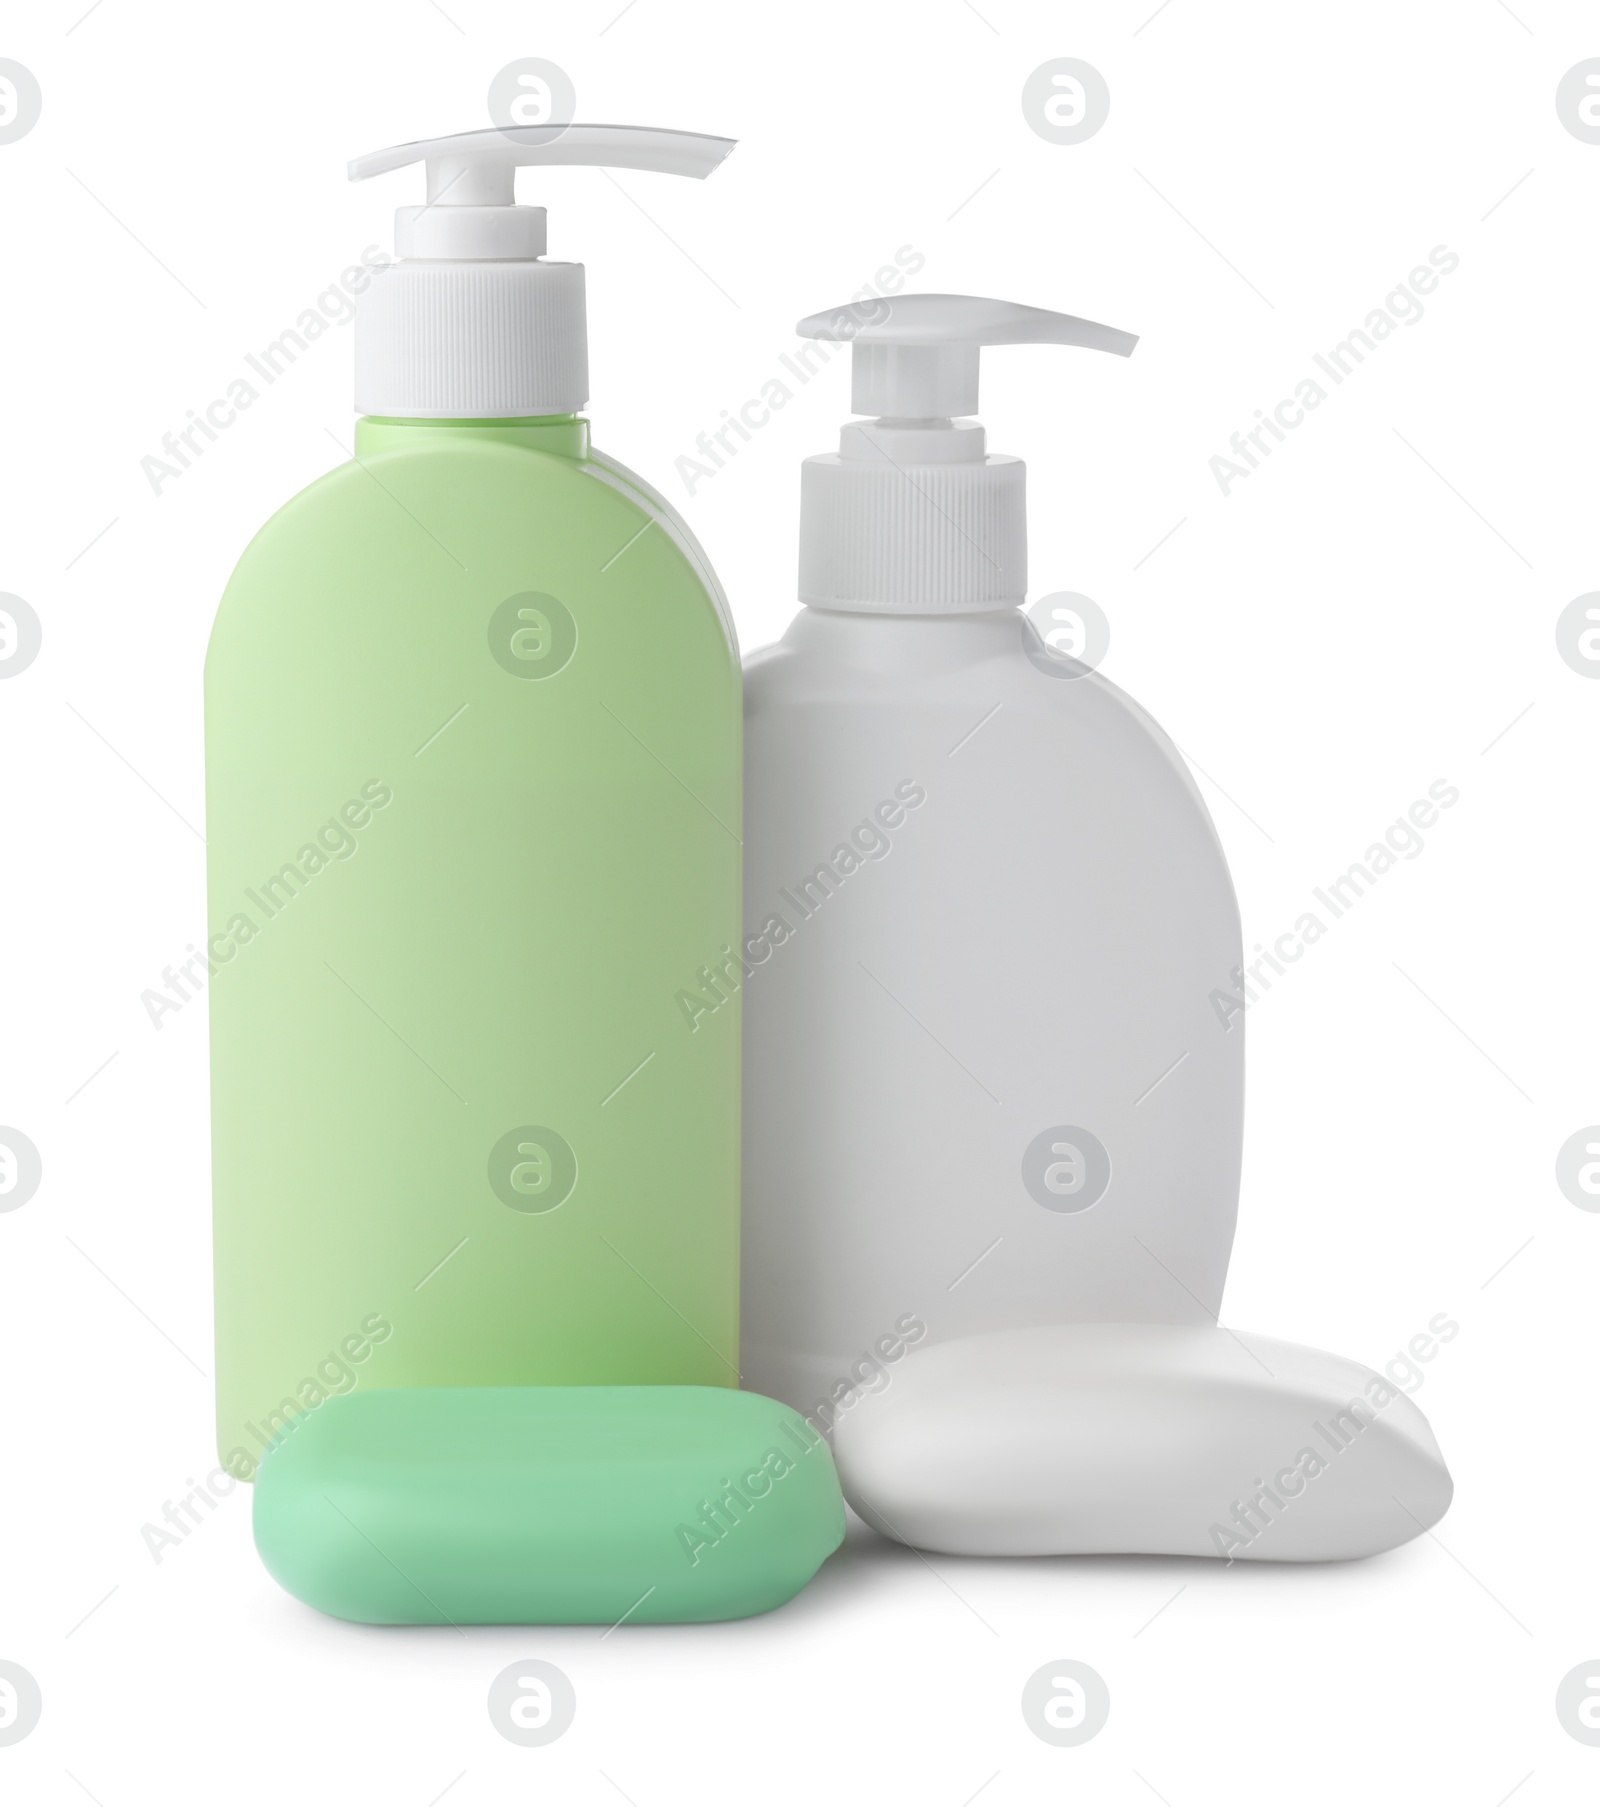 Photo of Soap bars and bottle dispensers on white table